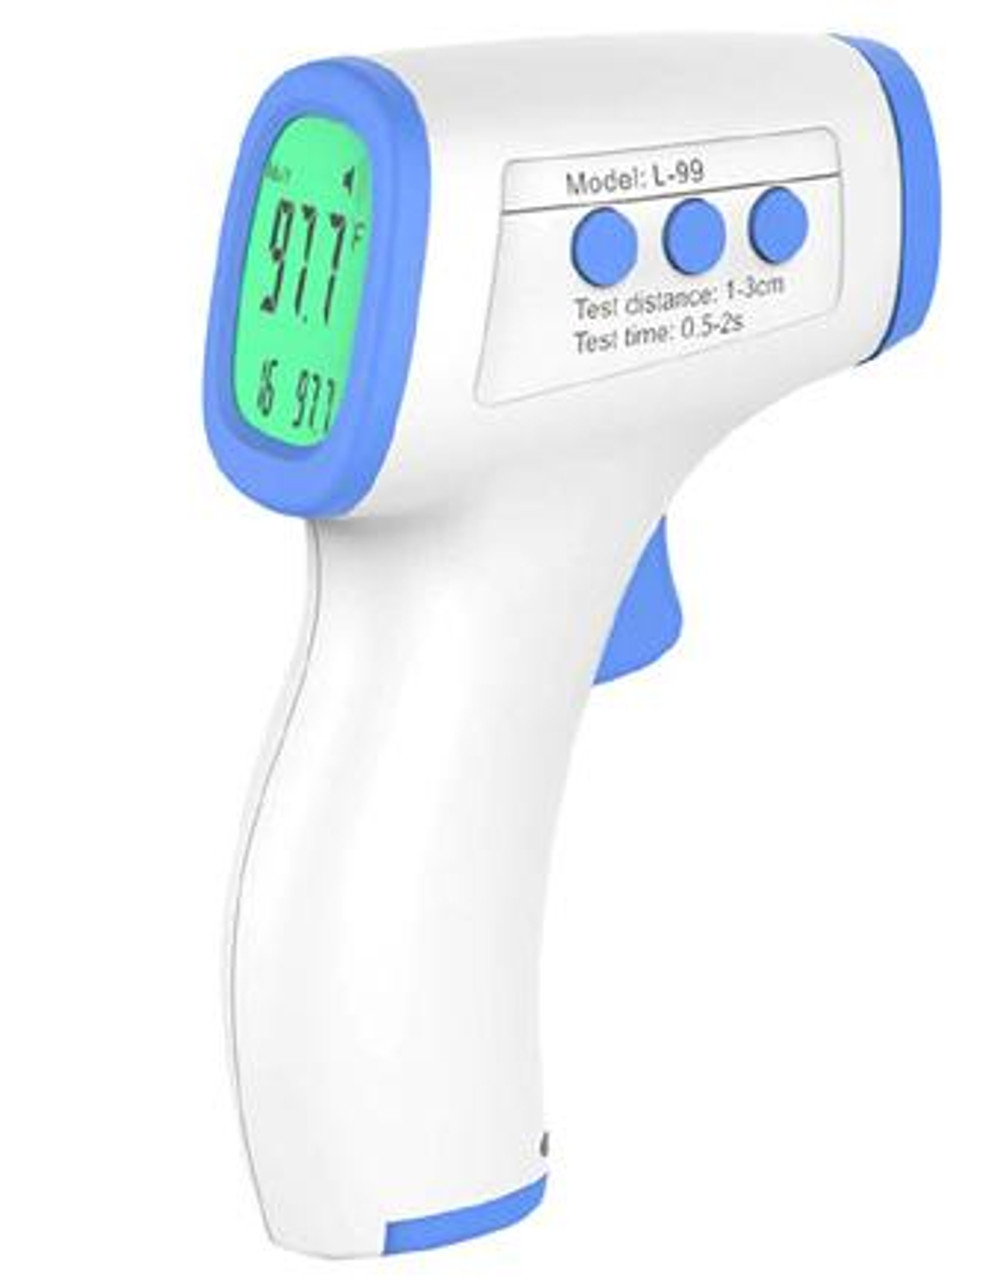 https://cdn11.bigcommerce.com/s-5fbxqalvu7/images/stencil/1280x1280/products/167/530/Infrared_No_Touch_Thermometer__55743.1591992483.jpg?c=2